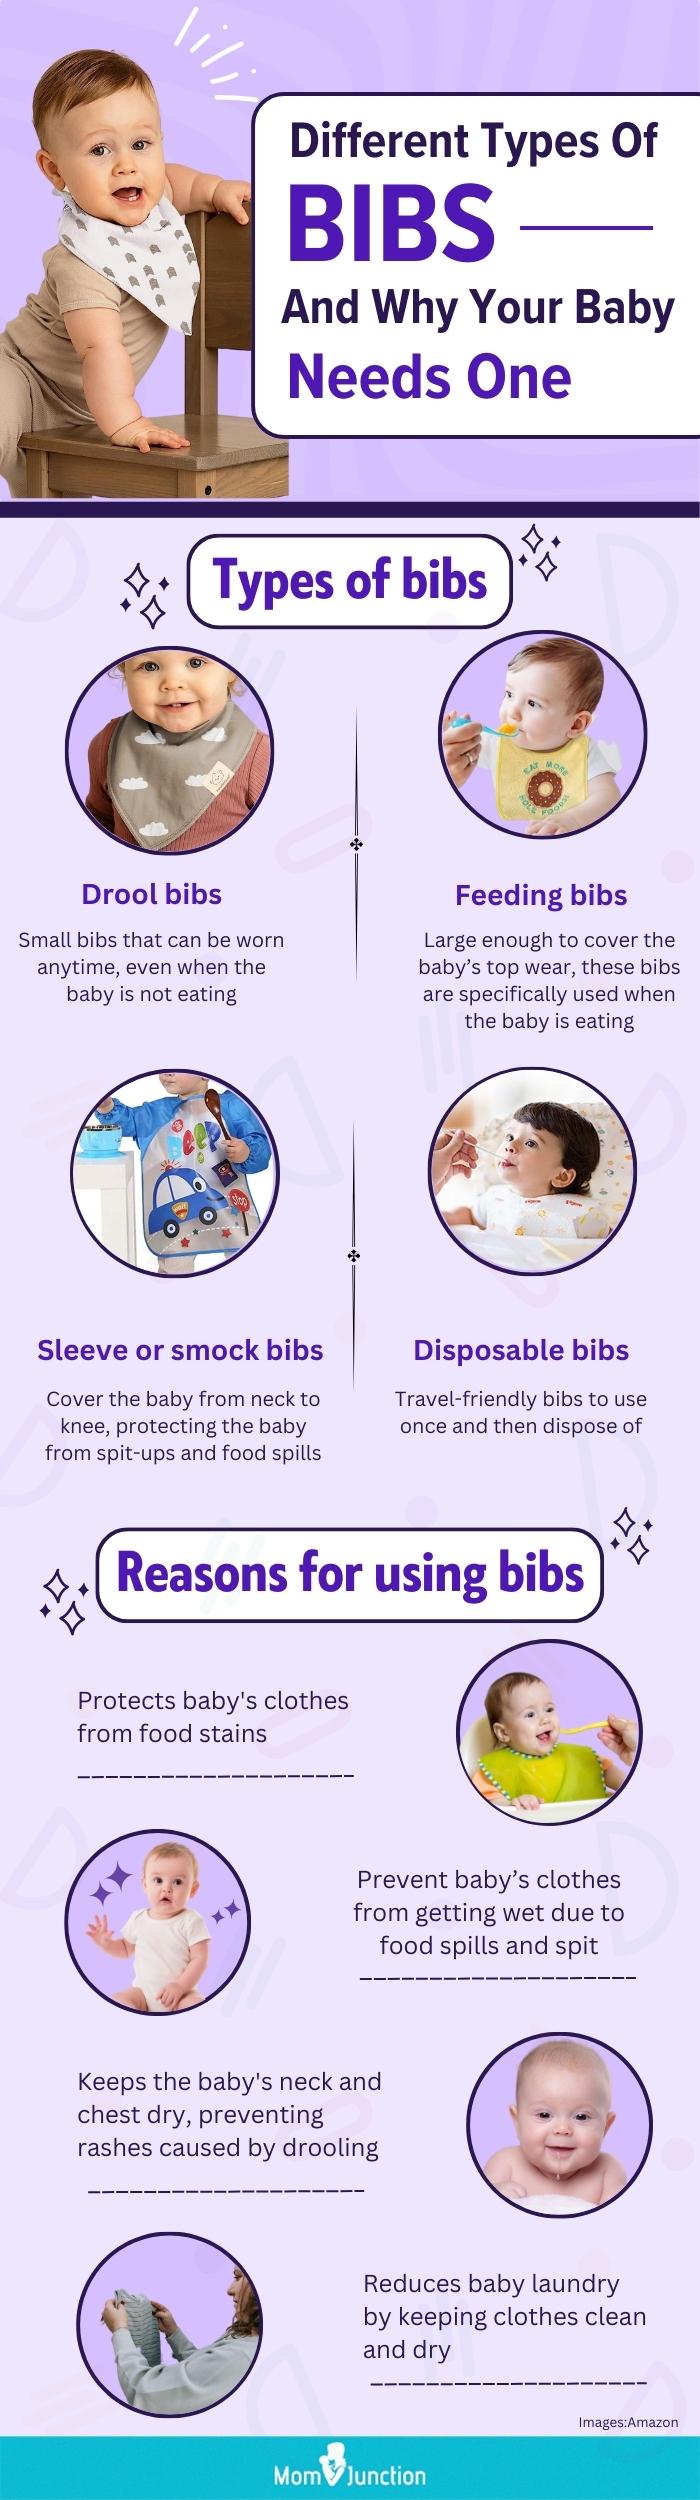 Different Types Of Bibs And Why Your Baby Needs One (infographic)